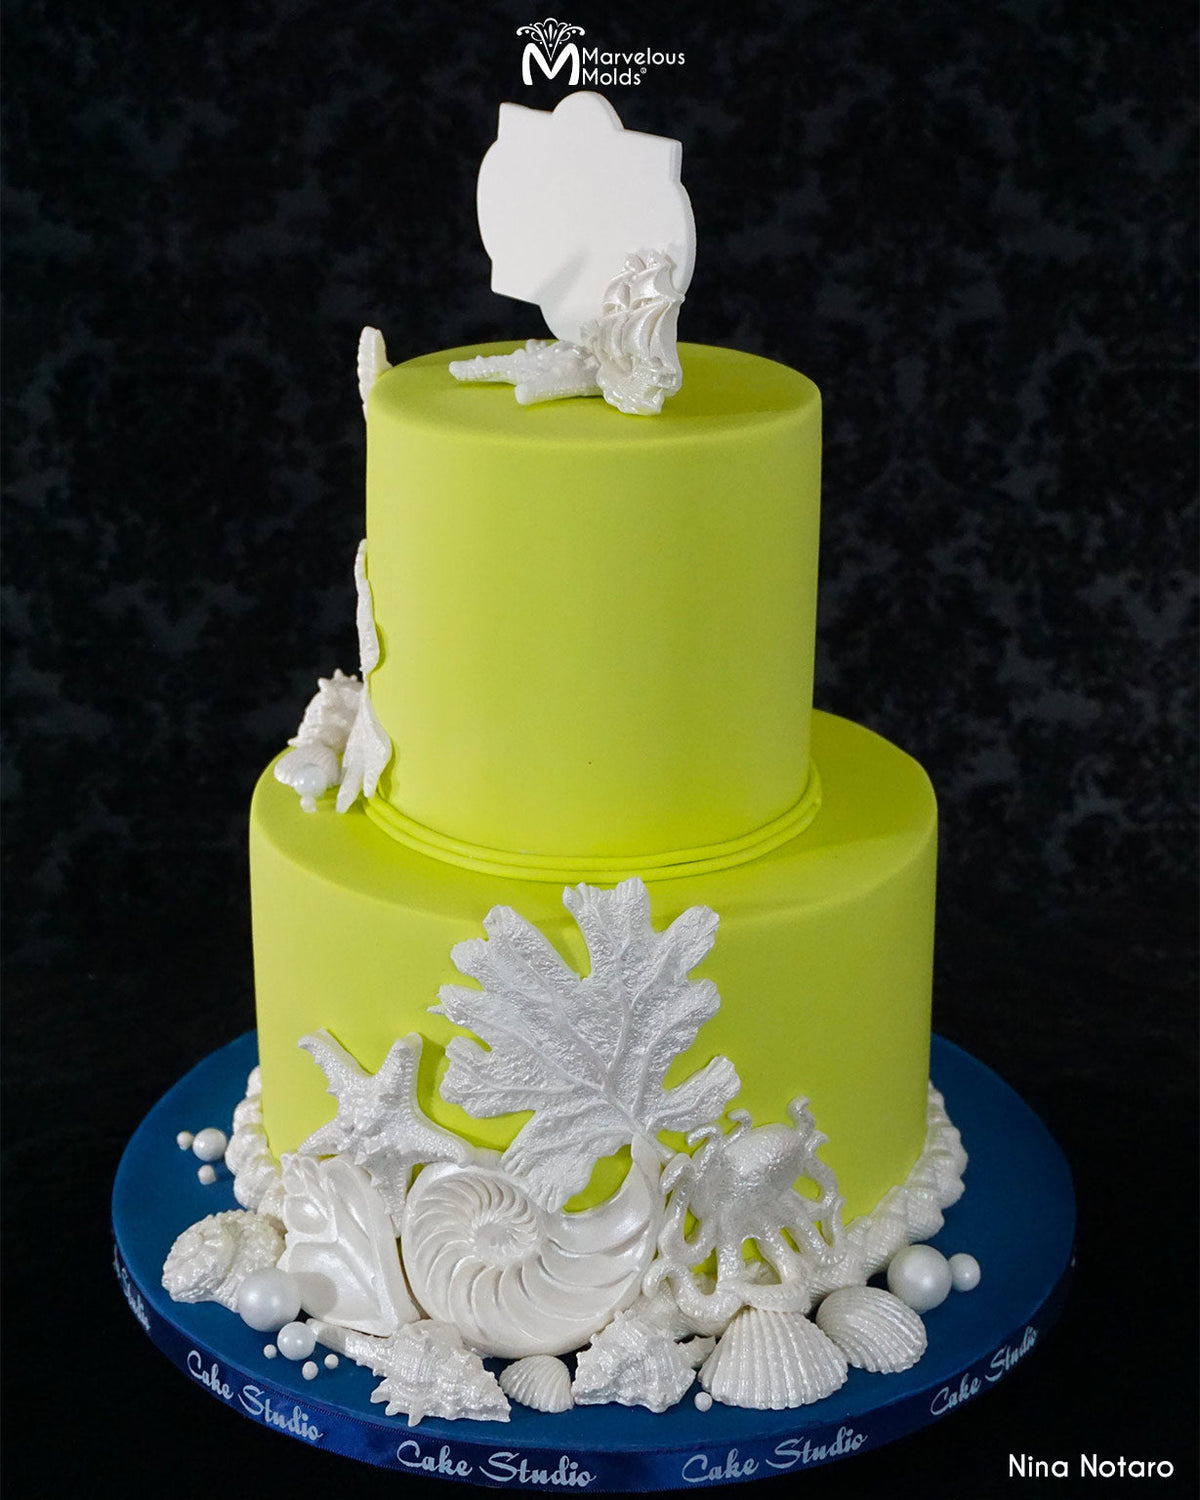 Lime Green Cake with White Seashells to Decorate, Created Using the Marvelous Molds Large Cockle Shells Silicone Mold